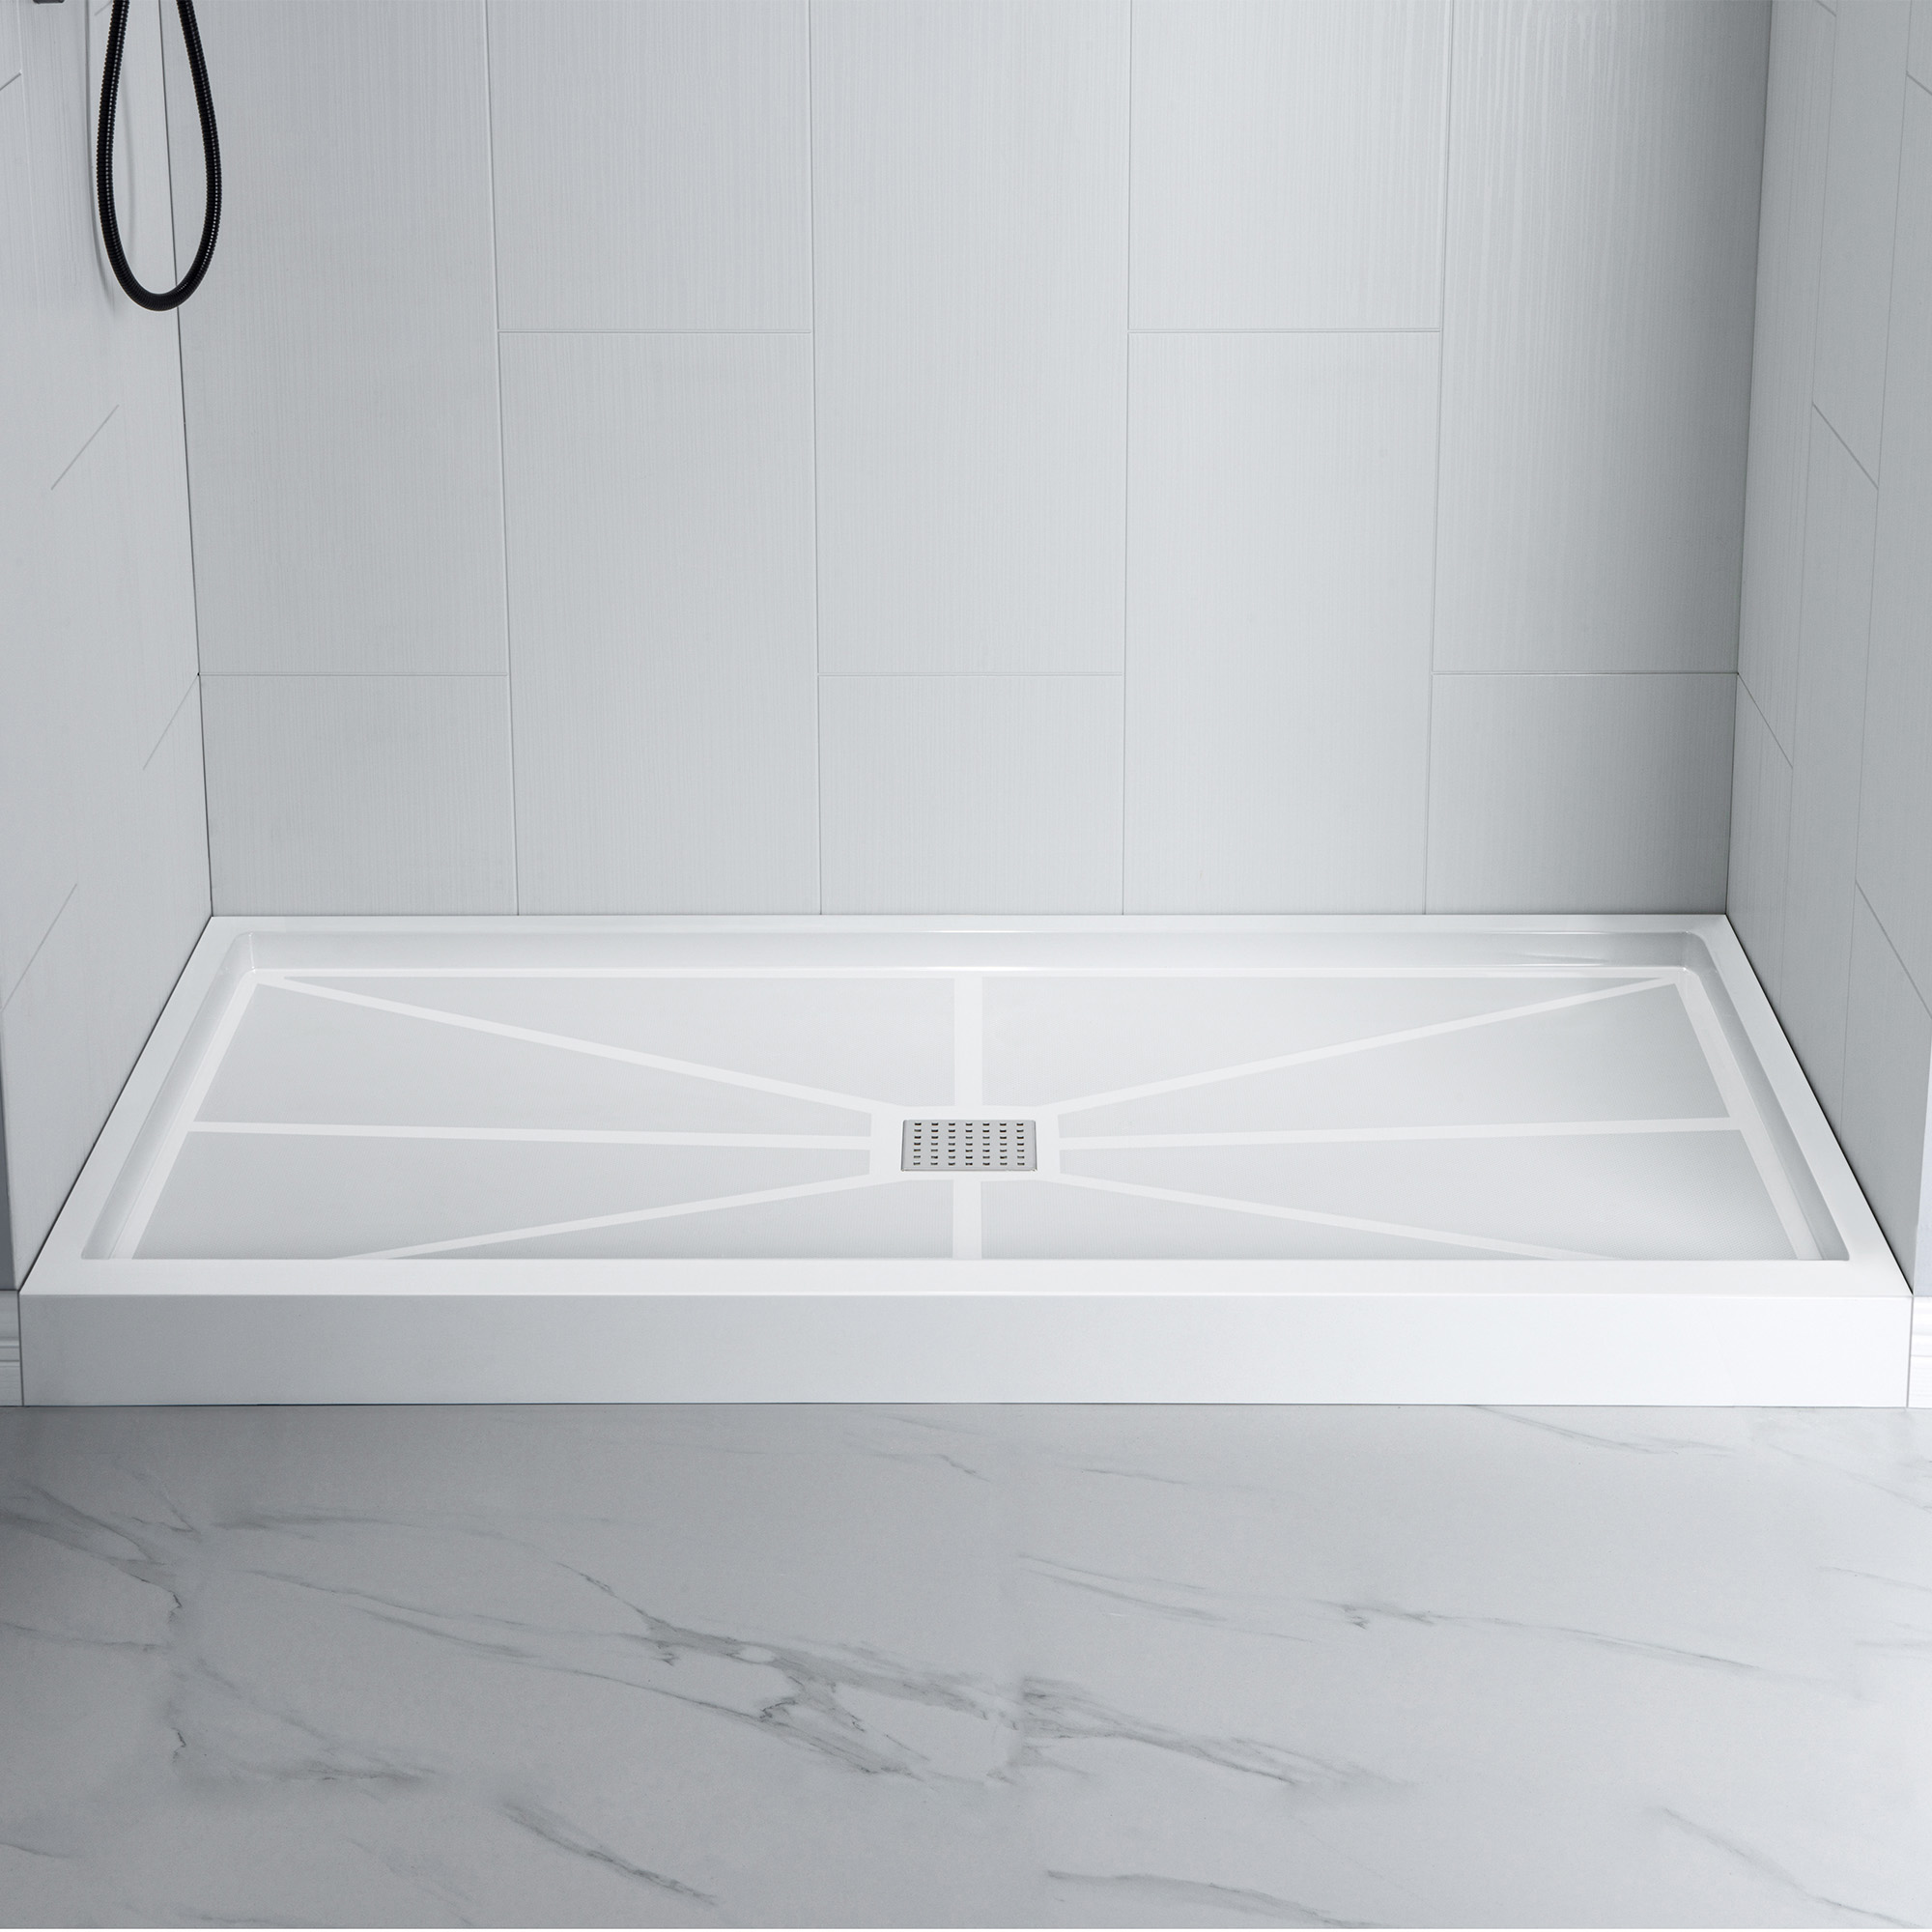  WOODBRIDGE Solid Surface 3-Panel Shower Wall Kit, 36-in L x 60-in W x 75-in H, Stacked Block in a Staggered Vertical Pattern. Matte White Finish_11747